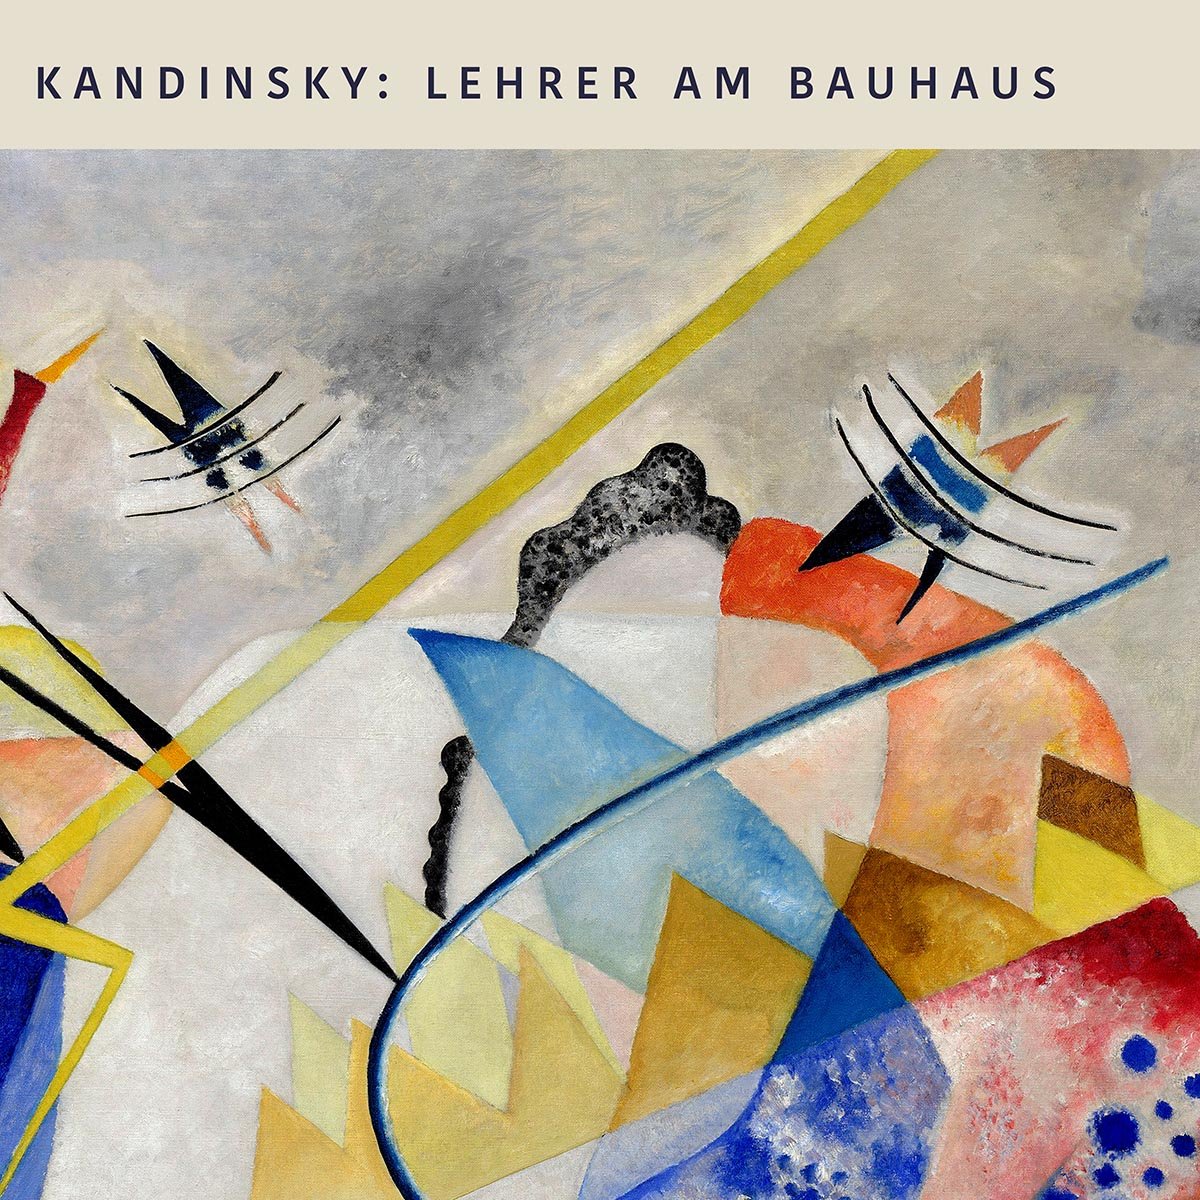 White Center by Wassily Kandinsky Exhibition Poster